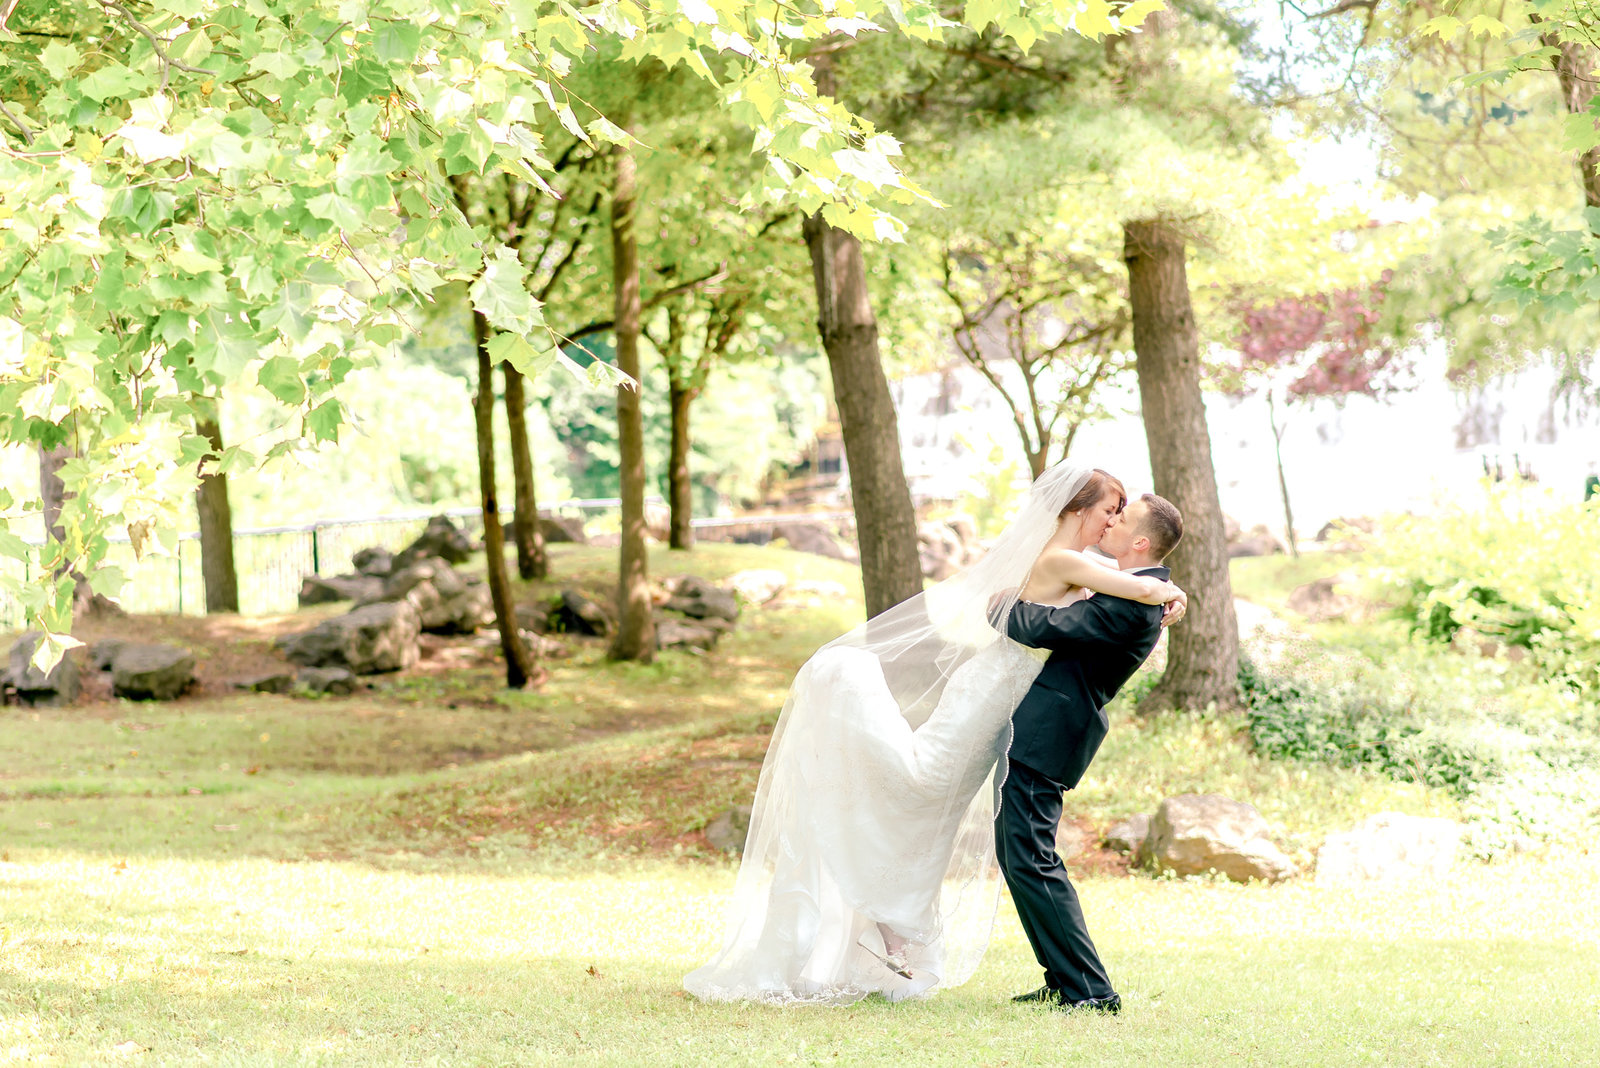 Groom lifts his bride for a photo  among light green trees